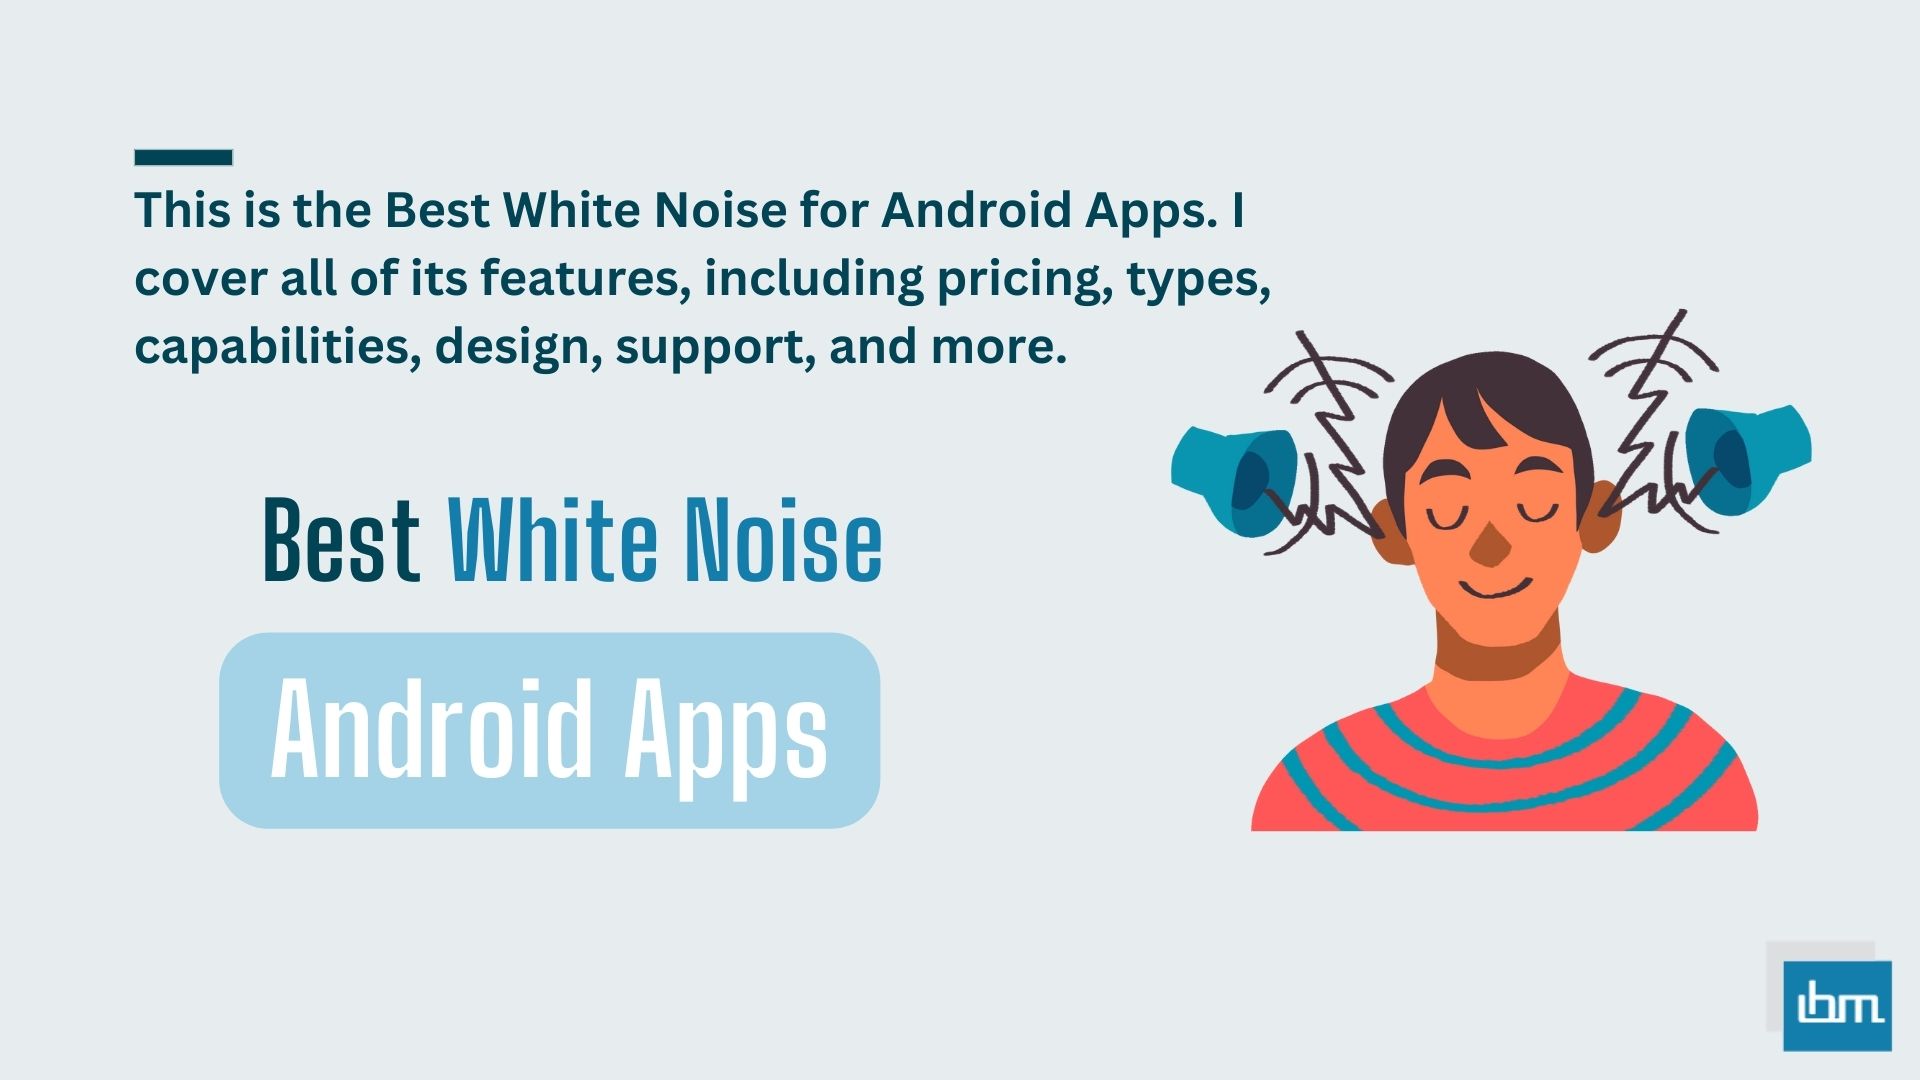 Best White Noise for Android Apps